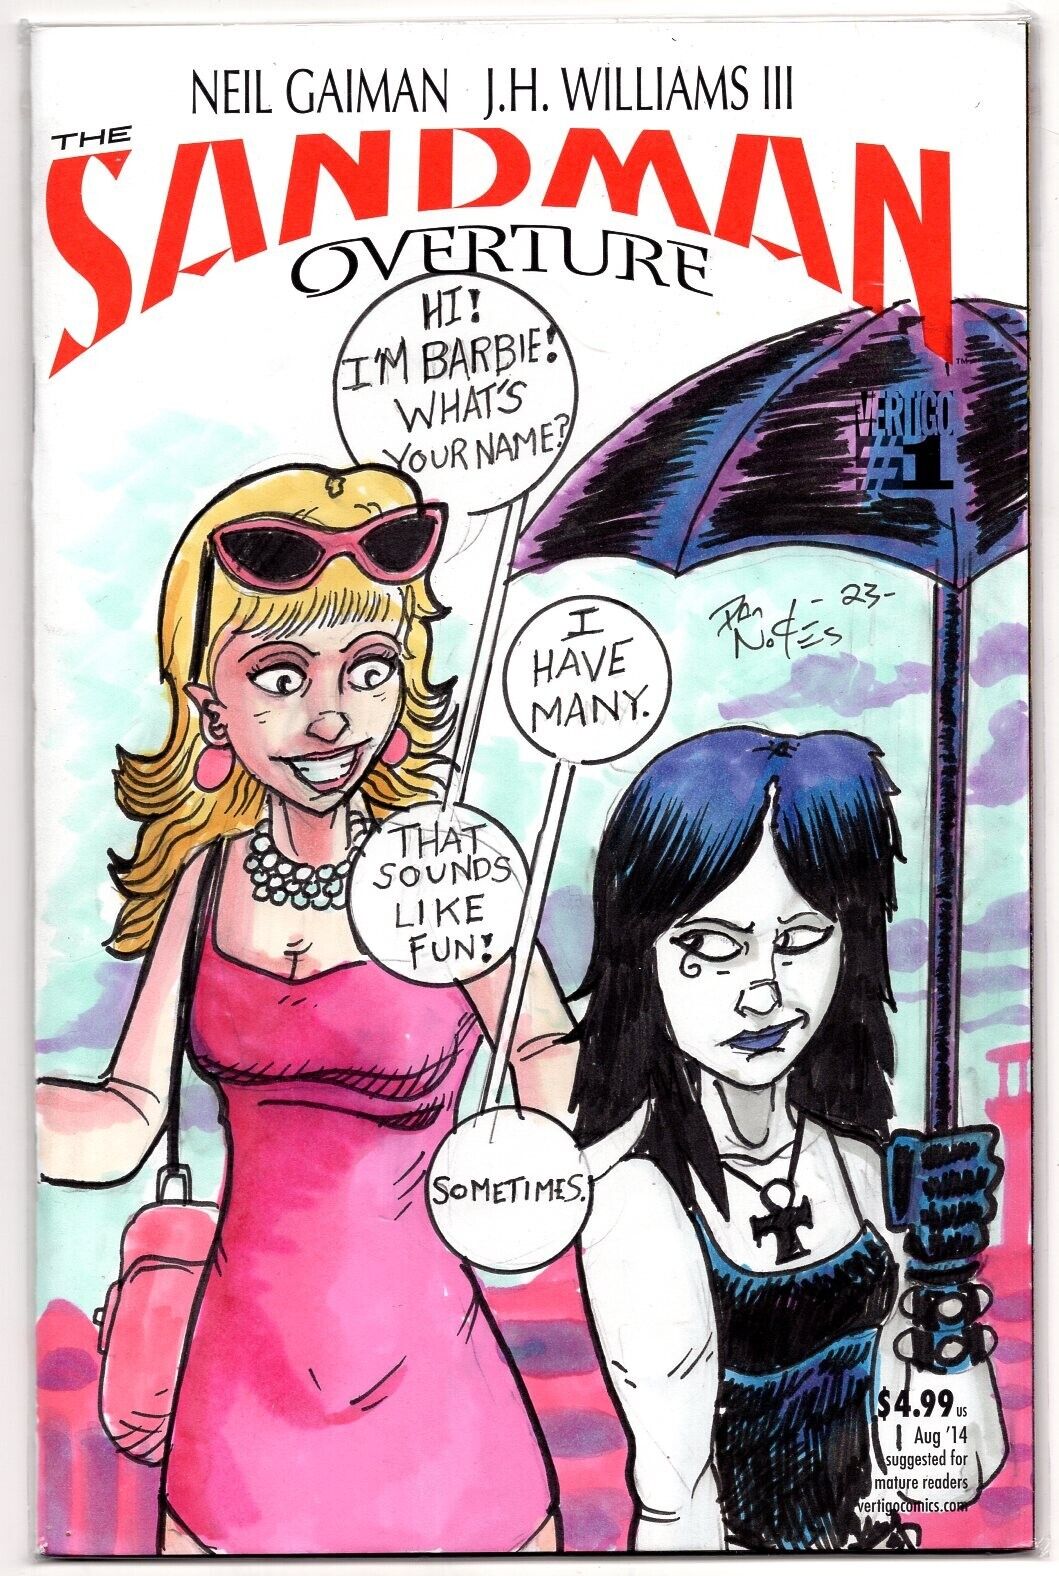 ONE-OF-A-KIND HAND-DRAWN, INKED AND COLORED SKETCHCOVER COMIC by Dan Nokes - B/D